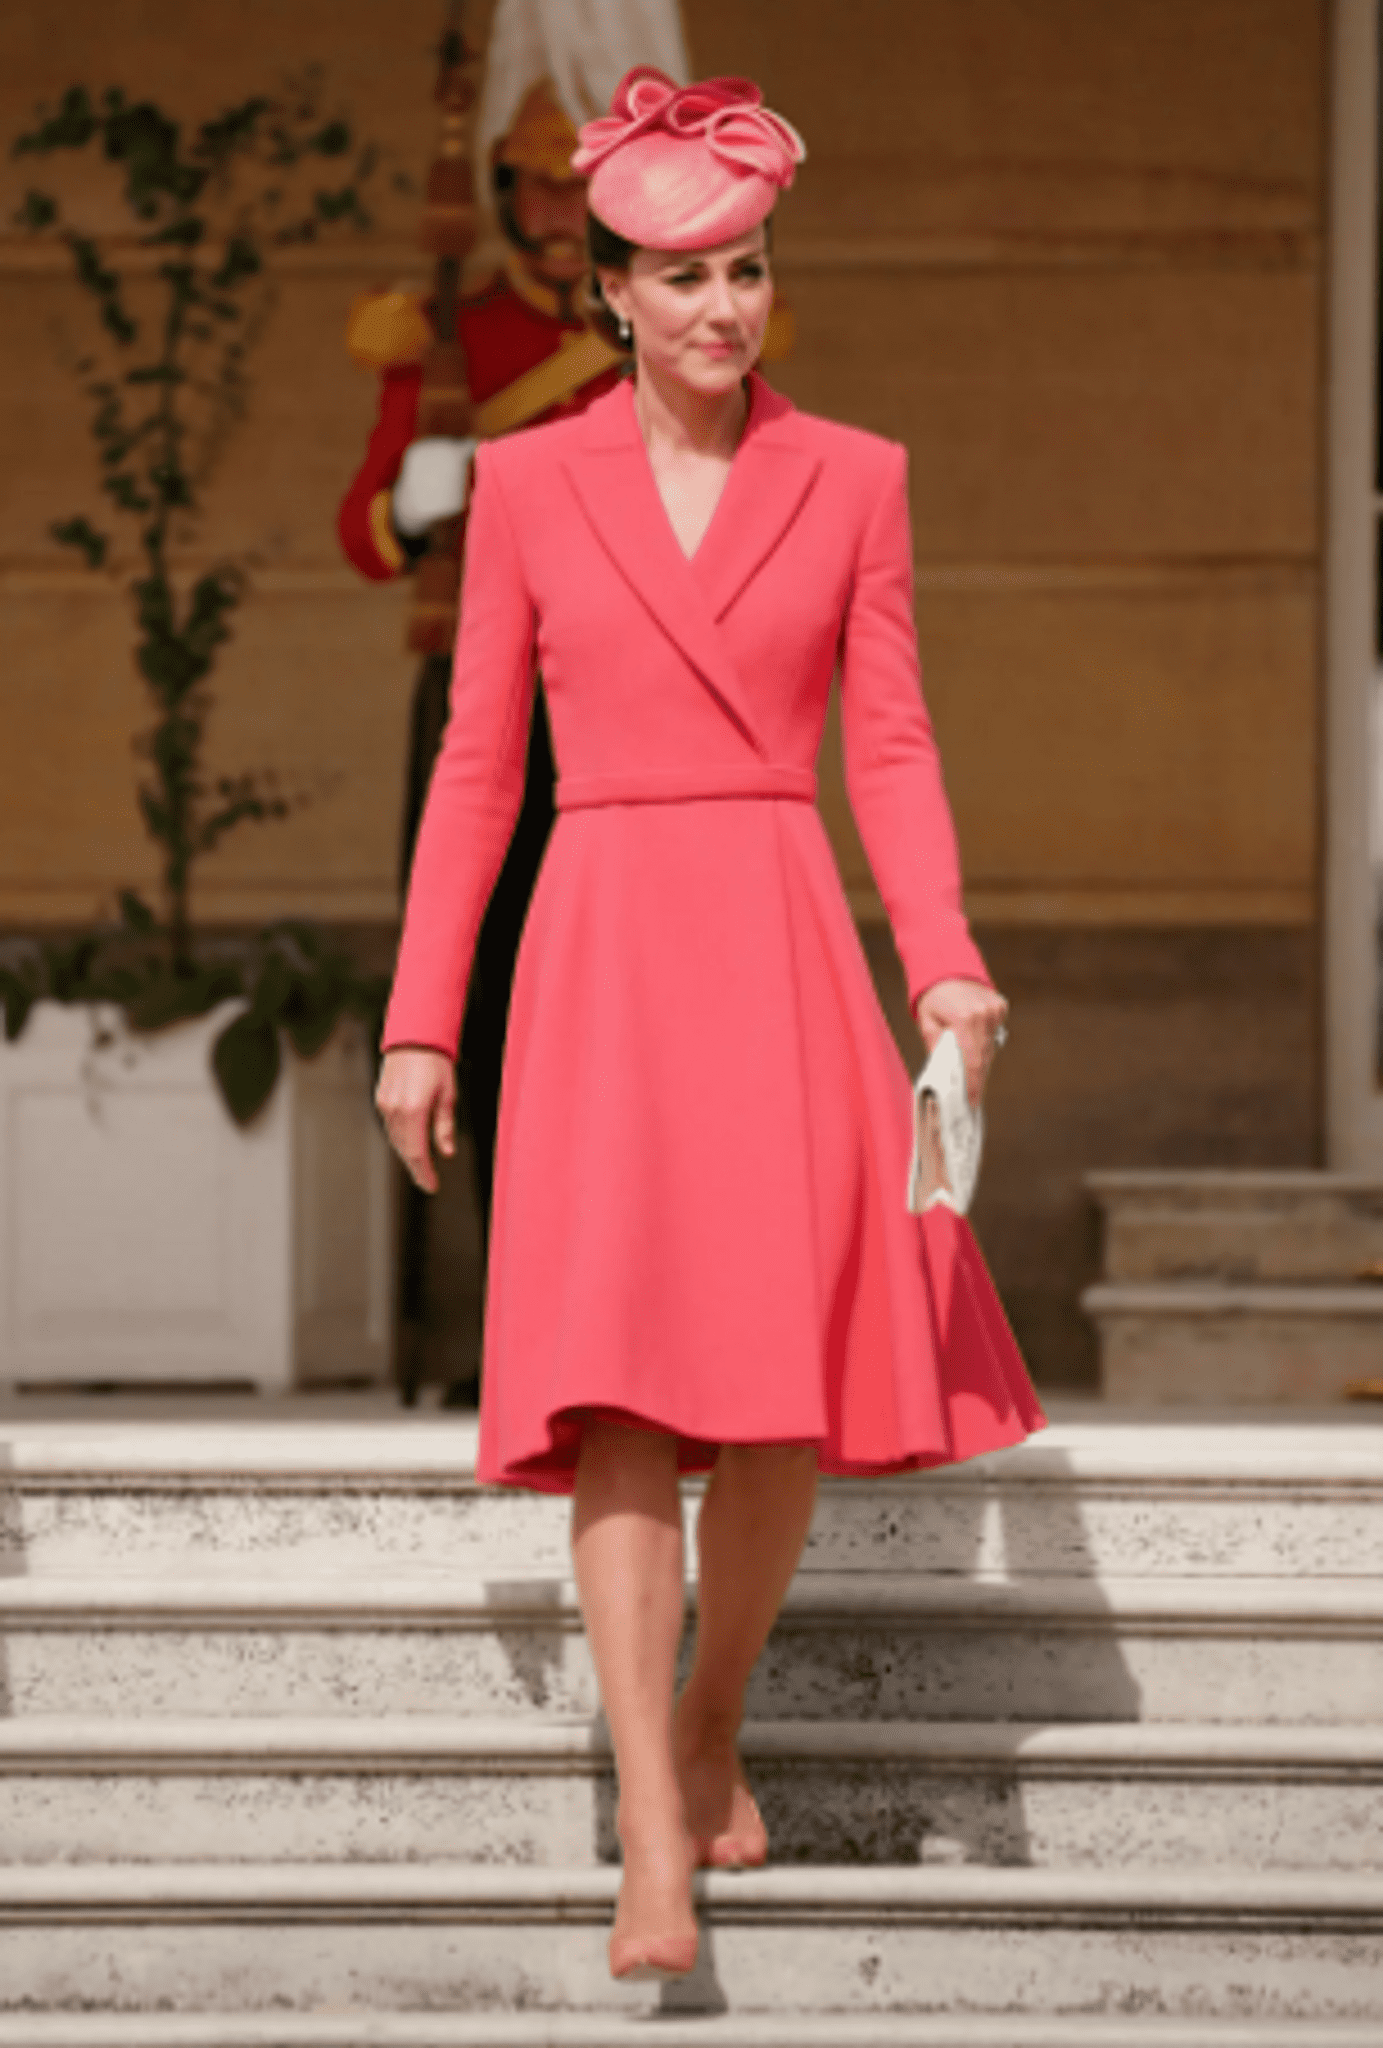 ”as-always-the-impeccable-kate-middleton-in-a-coral-coat-dress-receives-guests-in-the-garden-of-buckingham-palace”